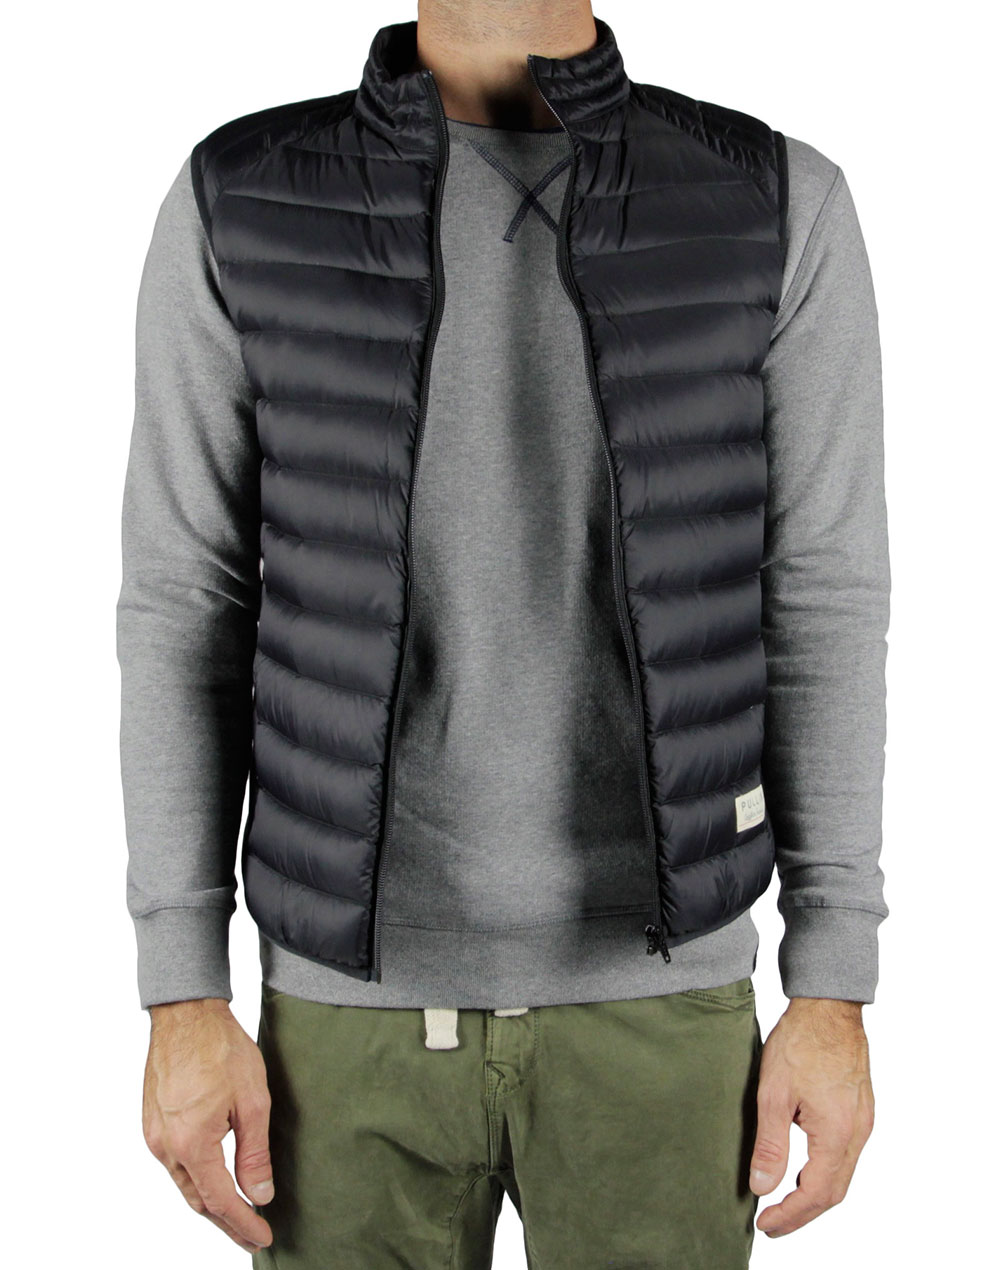 Men's feather jacket without sleeves LEAP